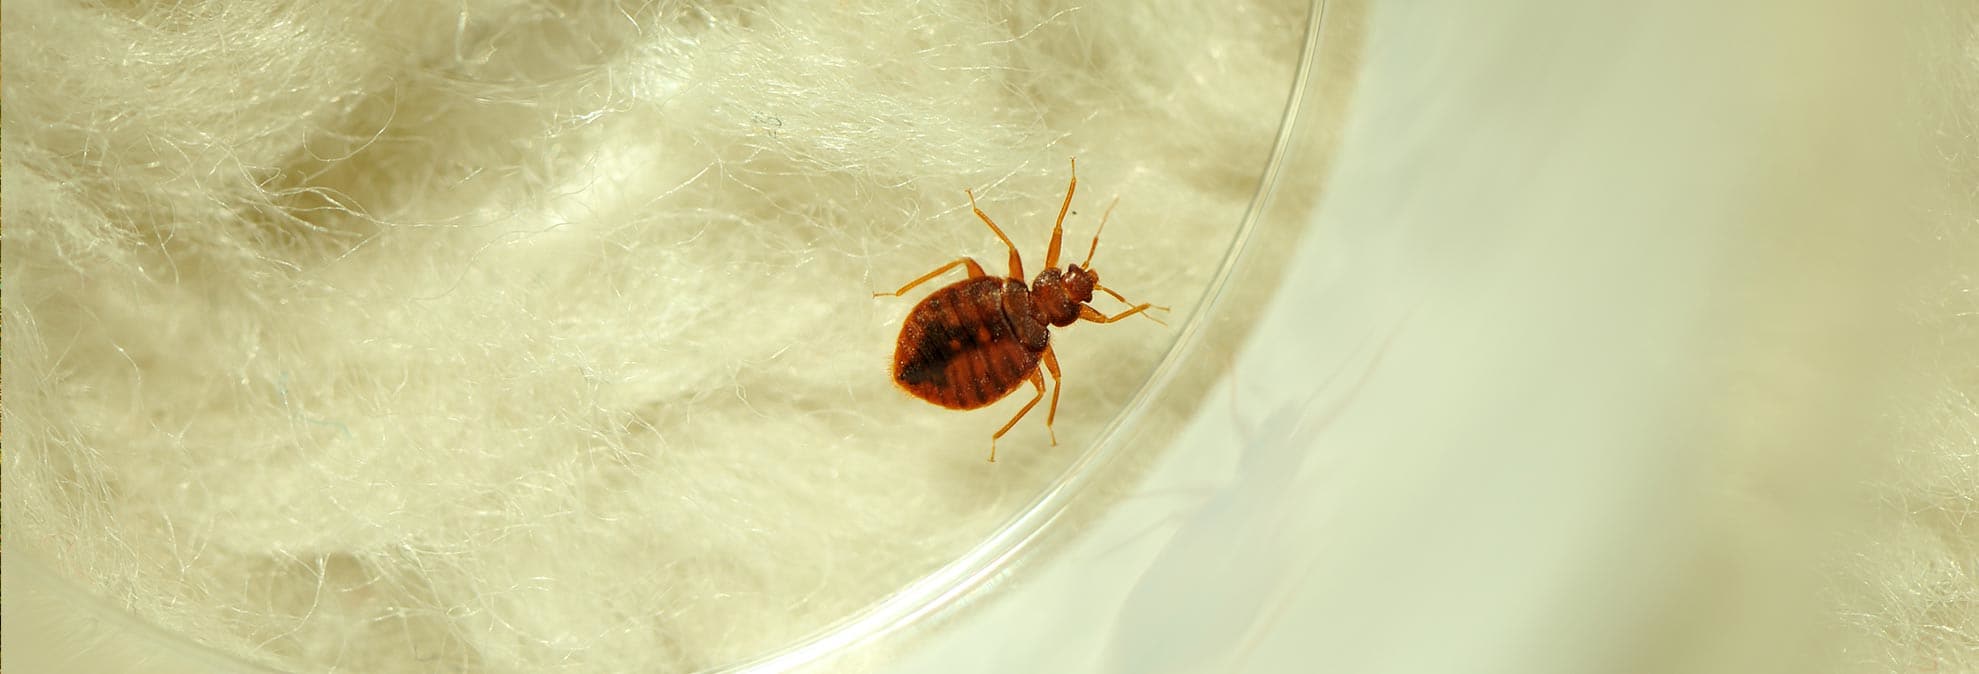 How to Get Rid of Bed Bugs - Consumer Reports